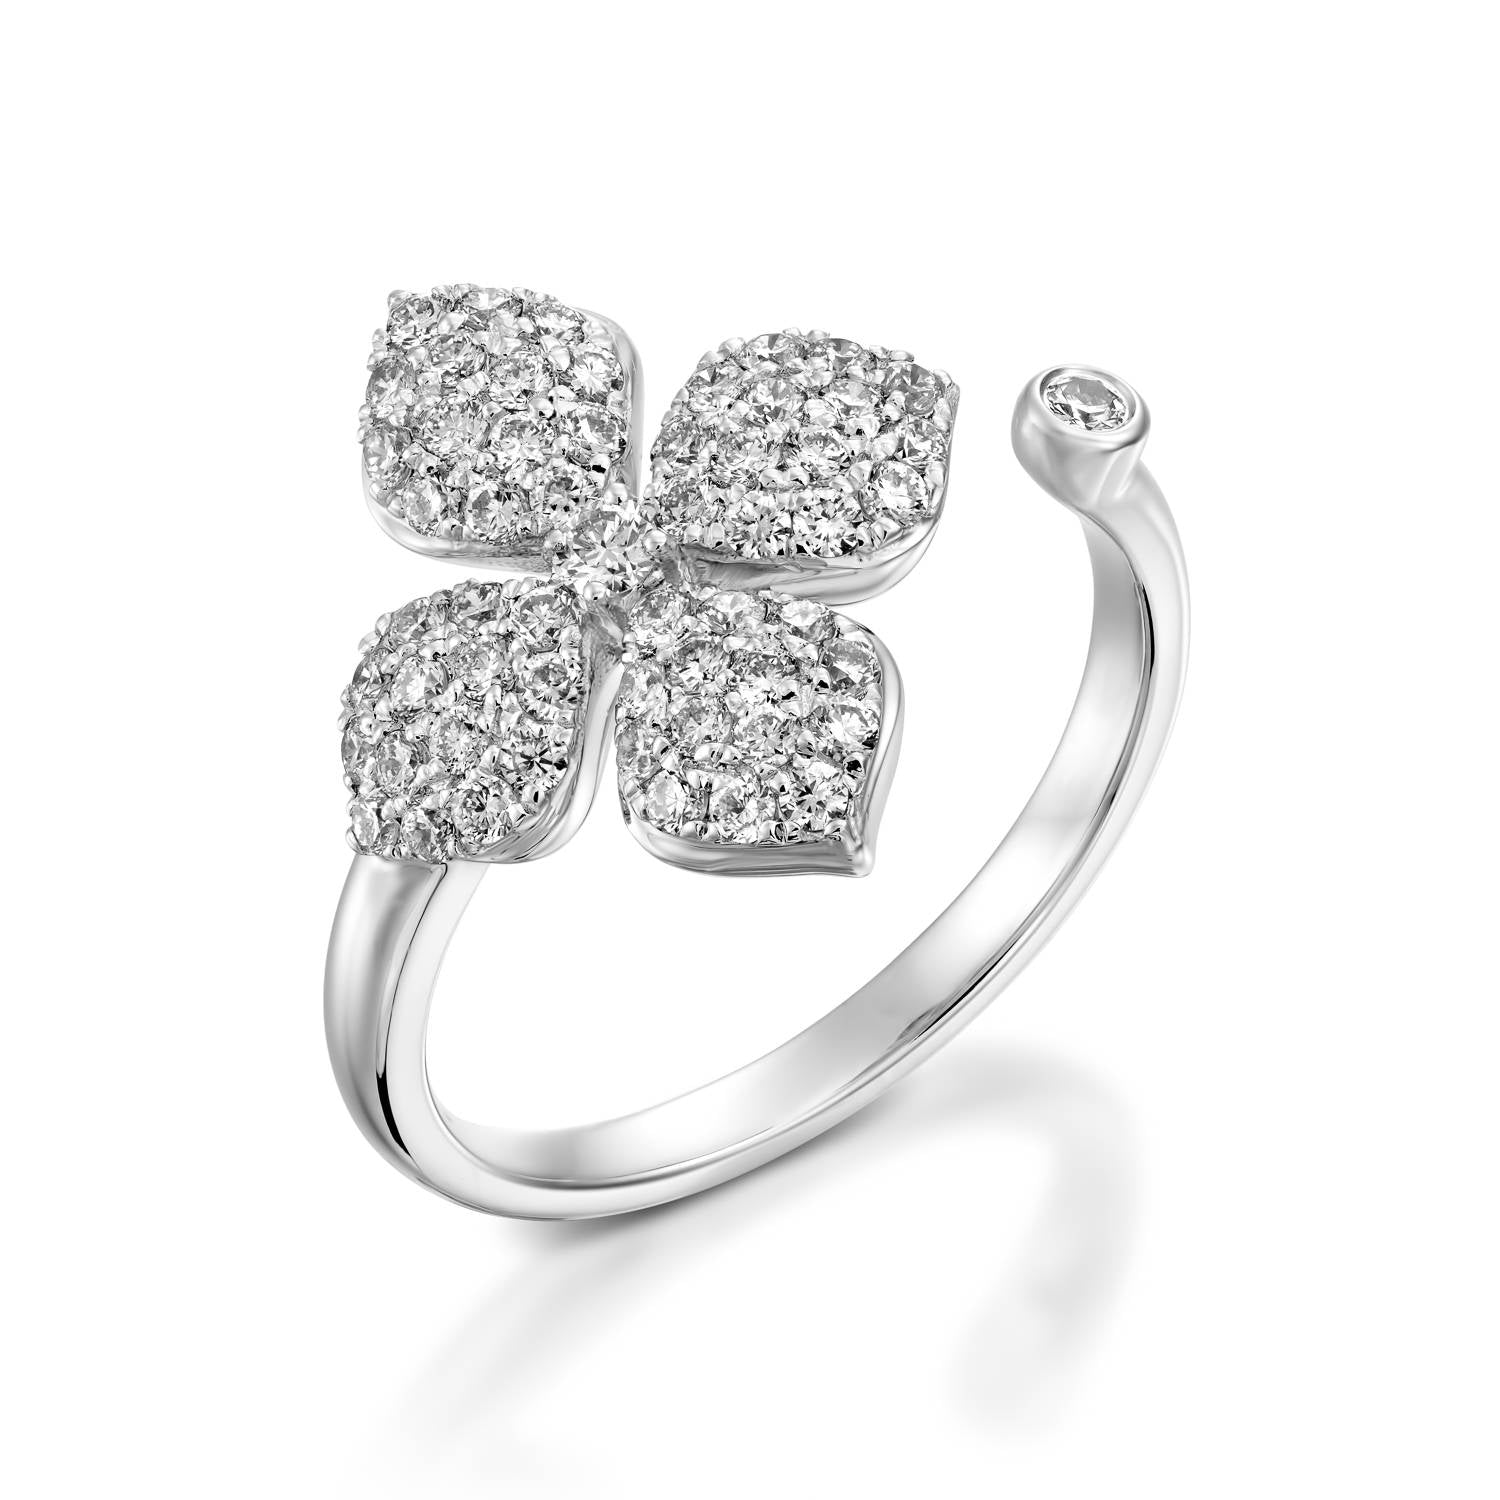 Color Blossom Ring, Yellow Gold, White Gold And Pave Diamond